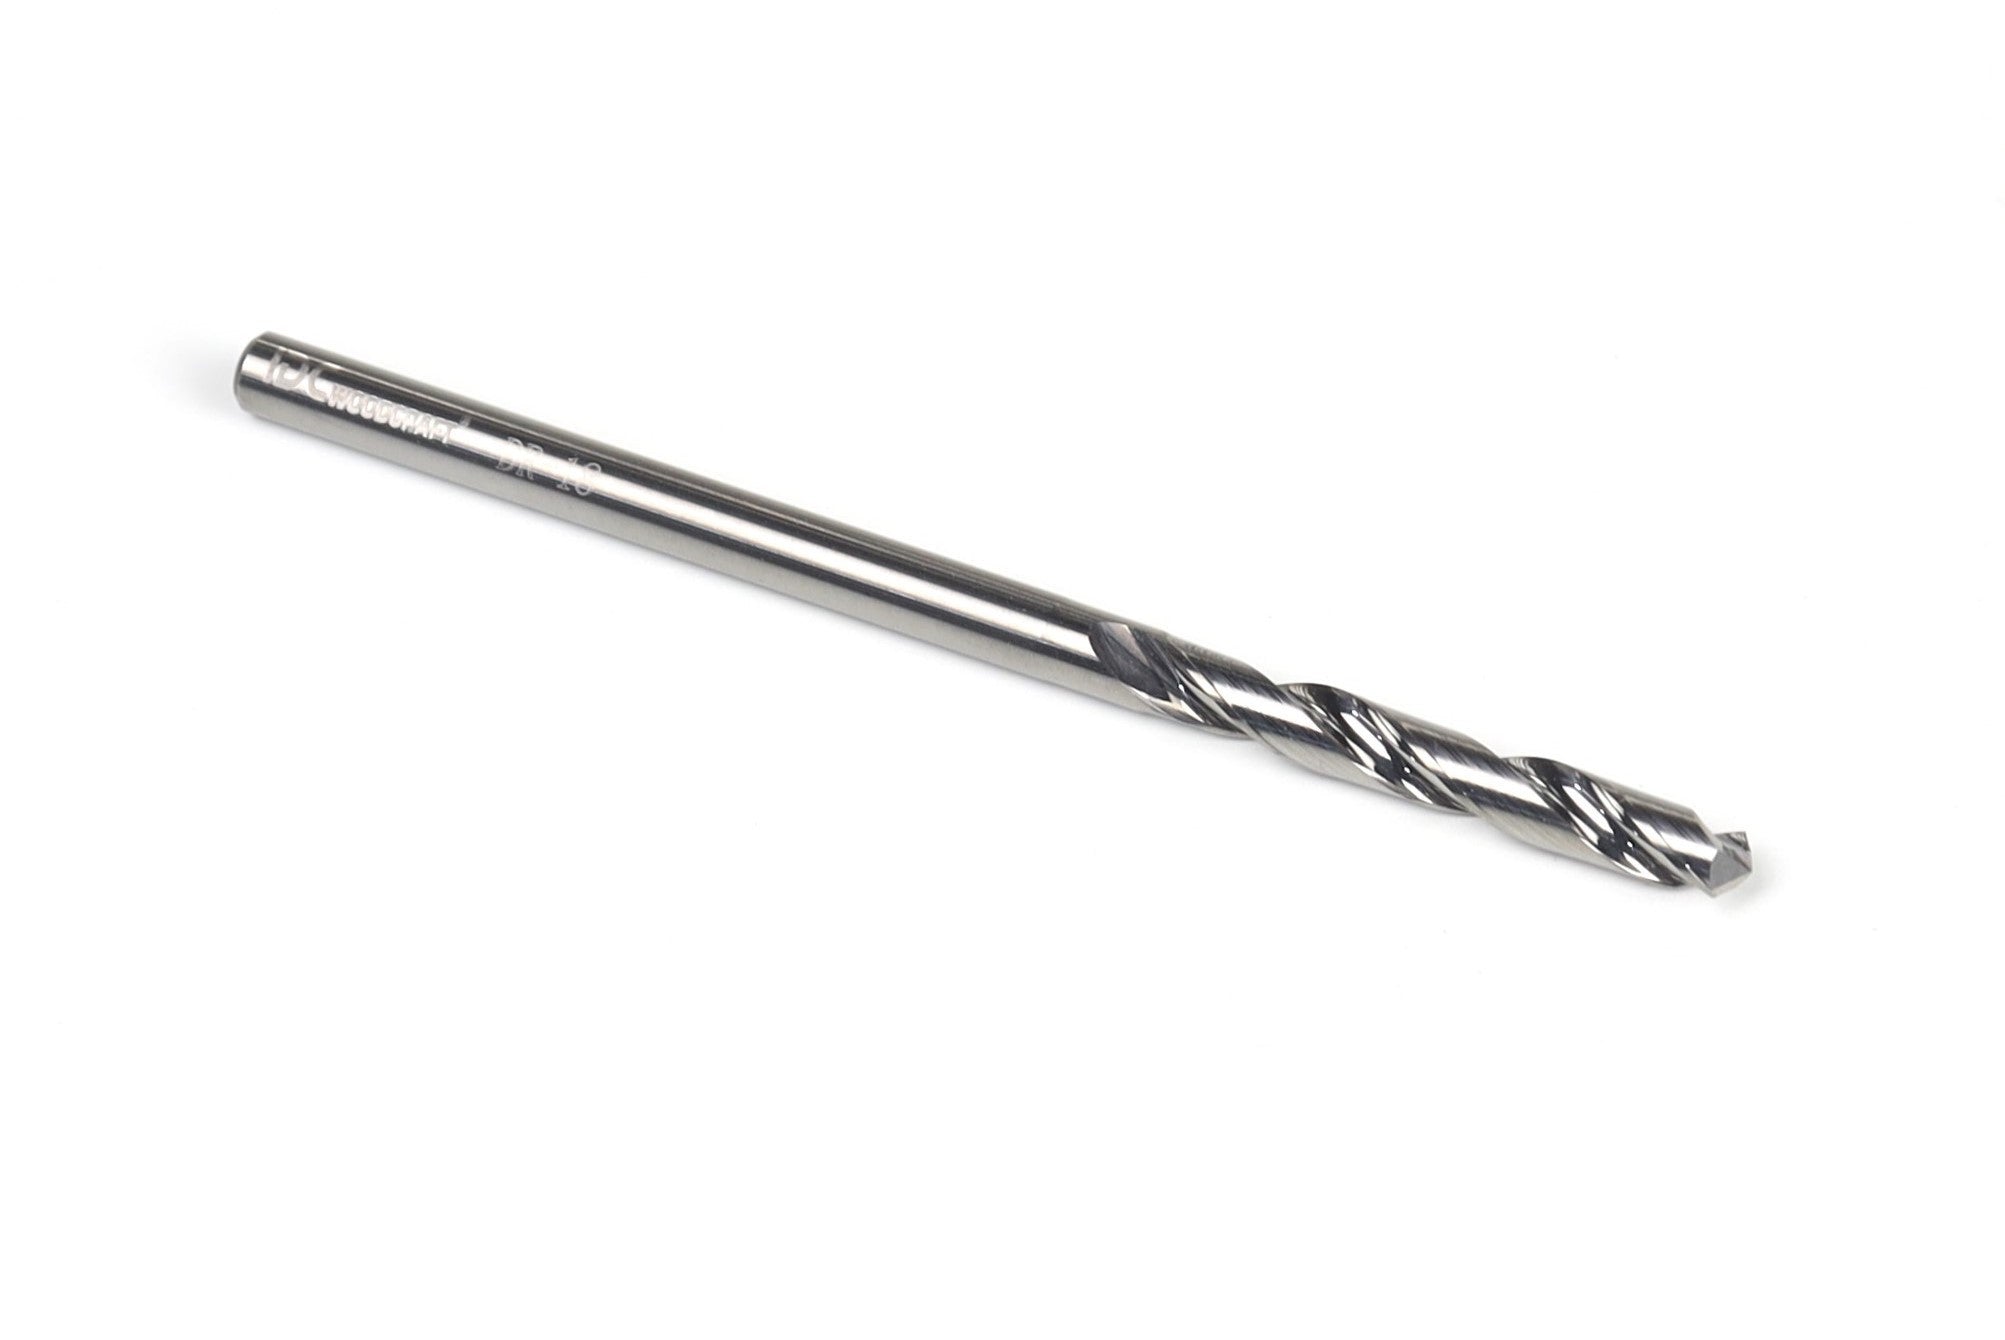 Extreme-Performance 1/8" Drill Bit for CNC Routers, Free Cribbage Files